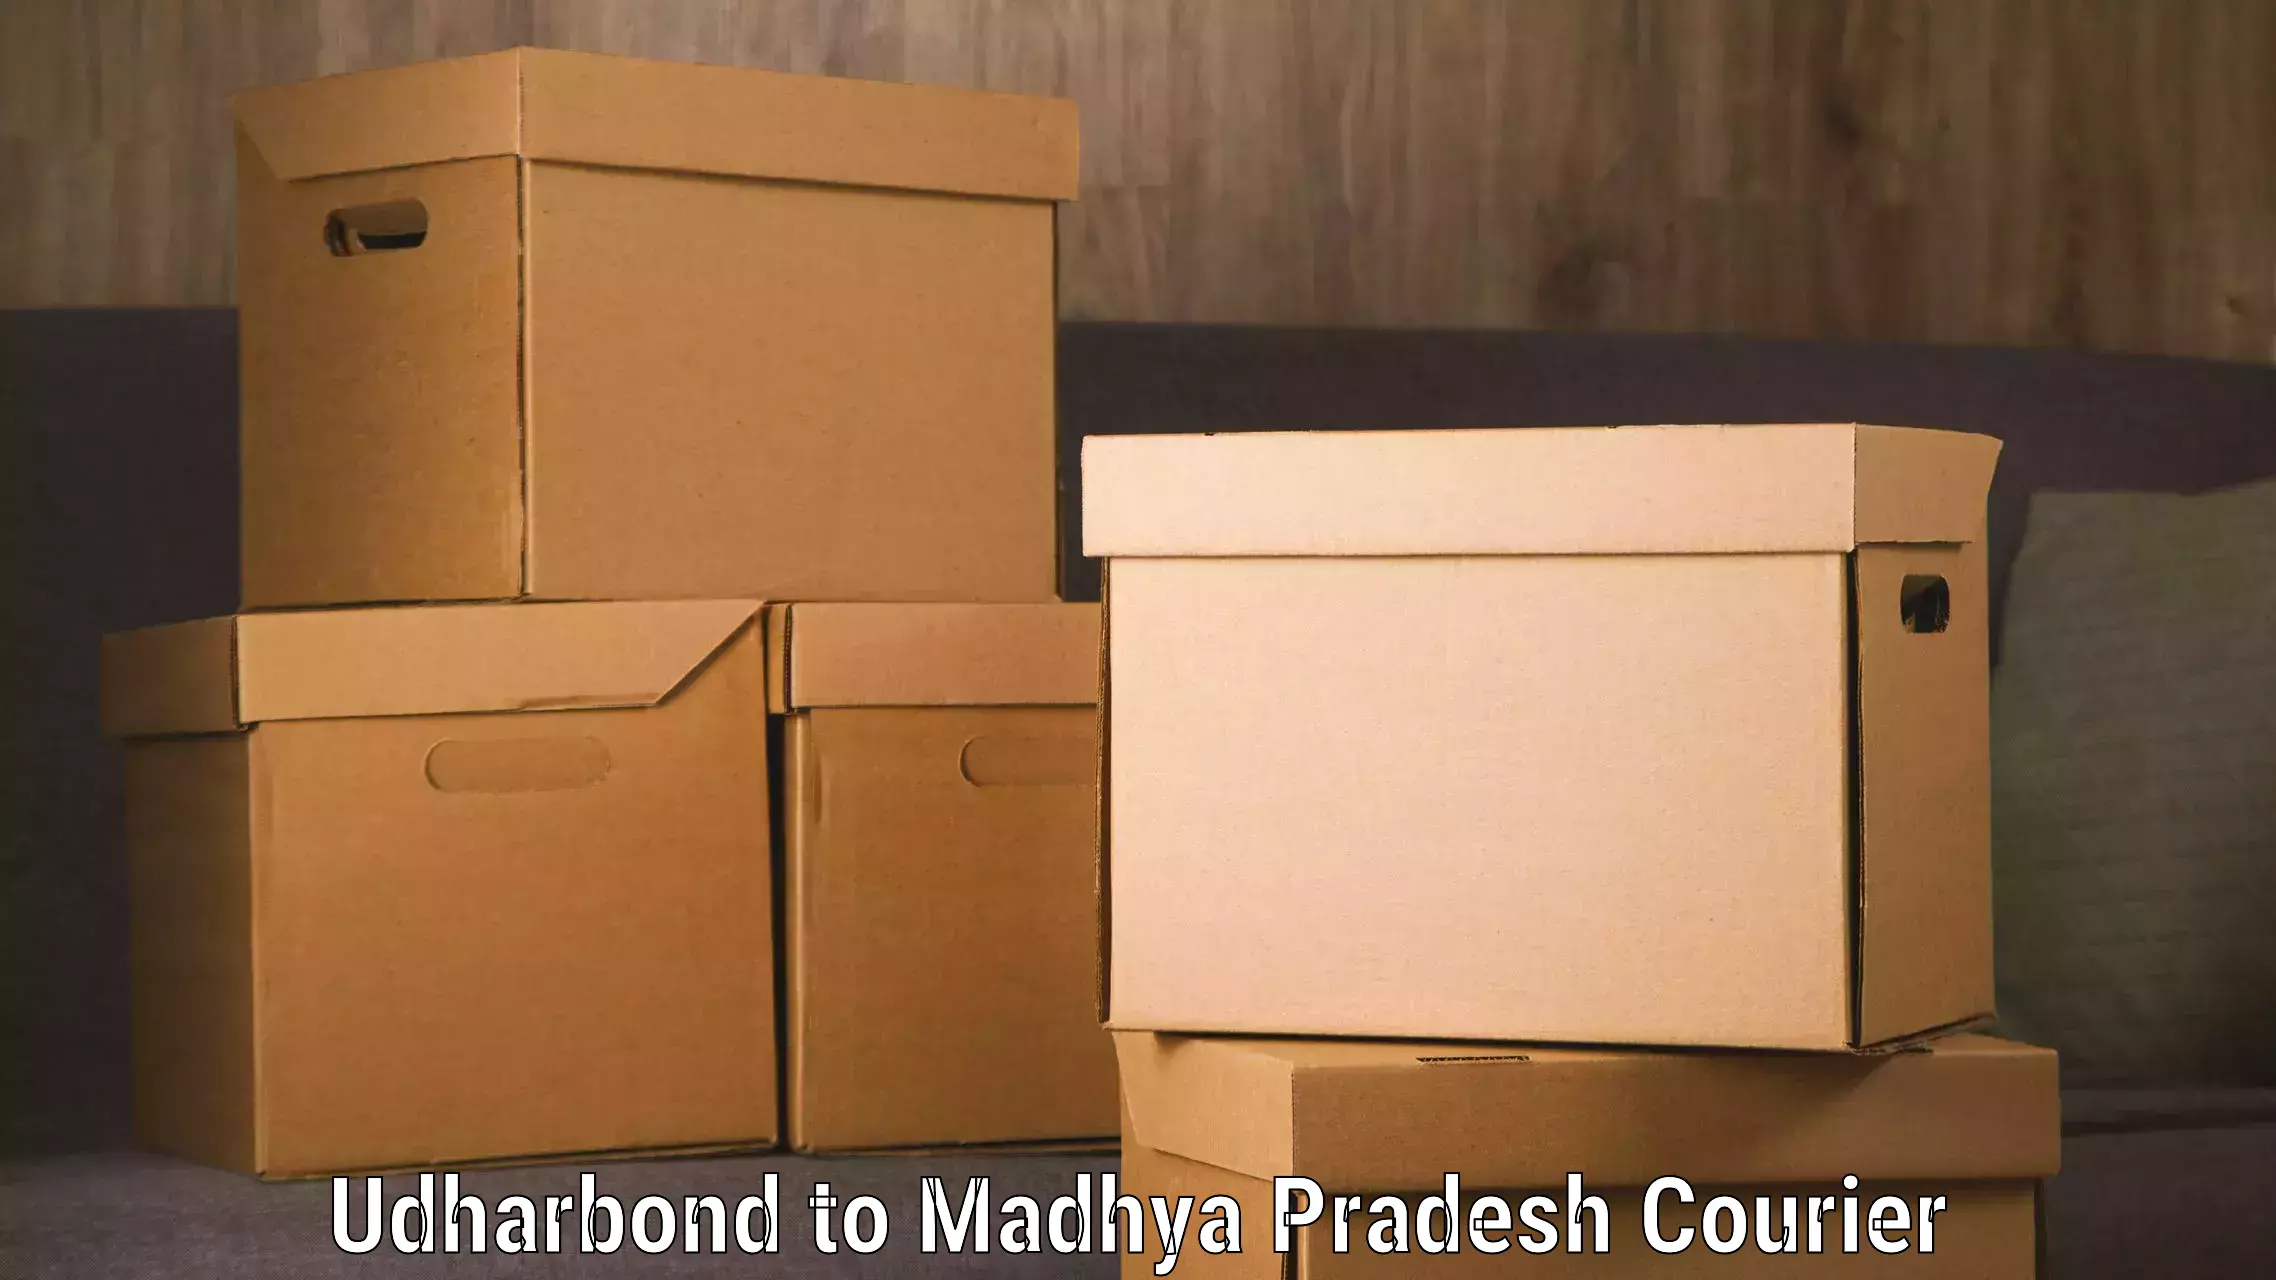 Luggage transport consulting in Udharbond to Madhya Pradesh